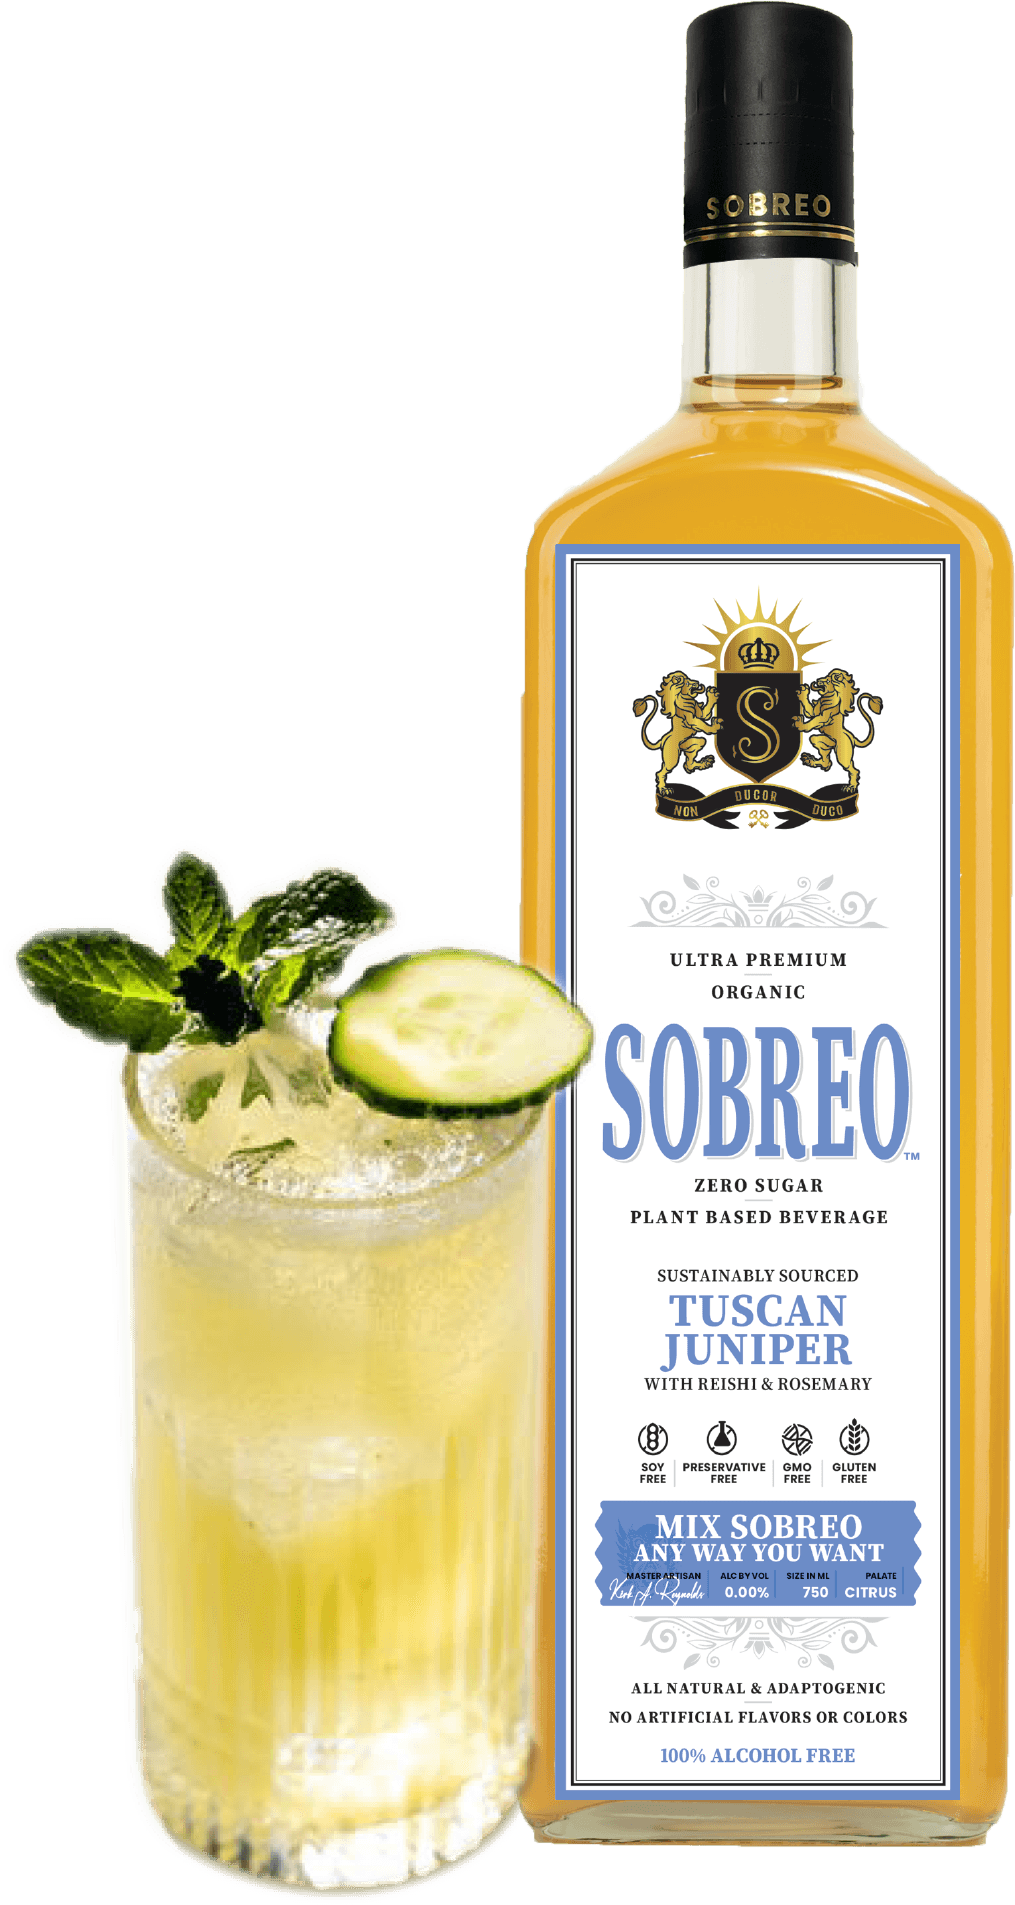 Sobreo non alcoholic cocktail and mocktail mixer in Tuscan Juniper citrus flavor perfect to infuse into a vodka martini recipe